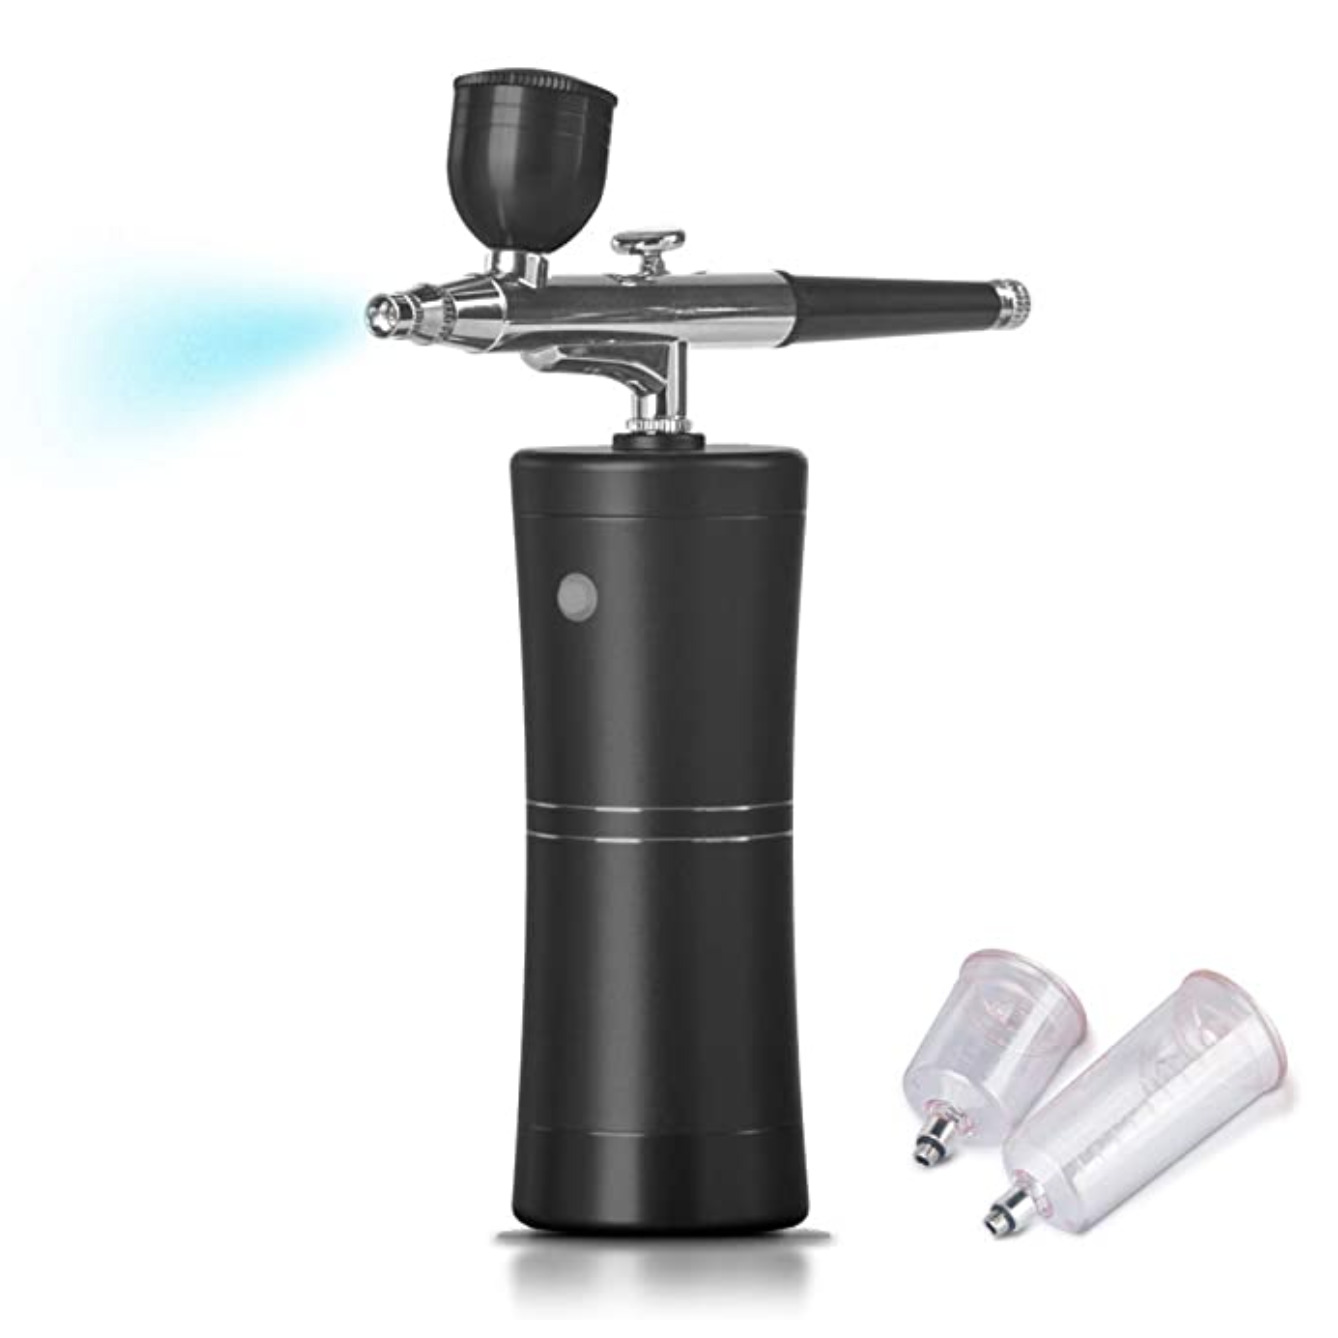 Cordless Airbrush System Compressor with additional Capacity Cups - Black